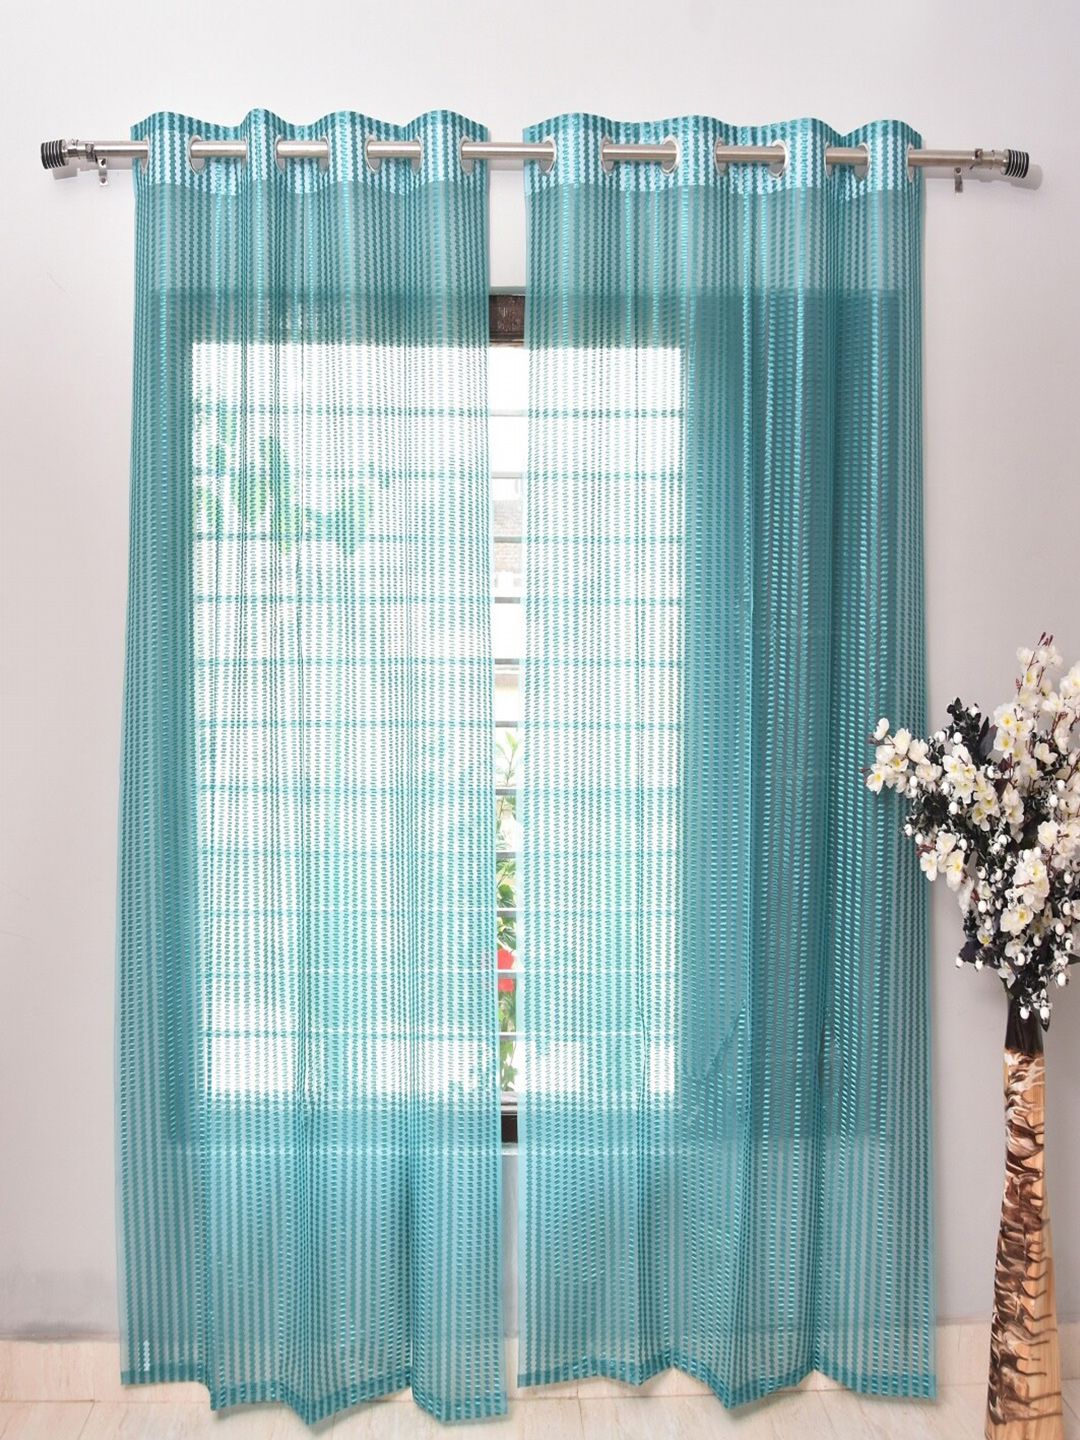 Homefab India Unisex Turquoise Blue Curtains and Sheers Price in India